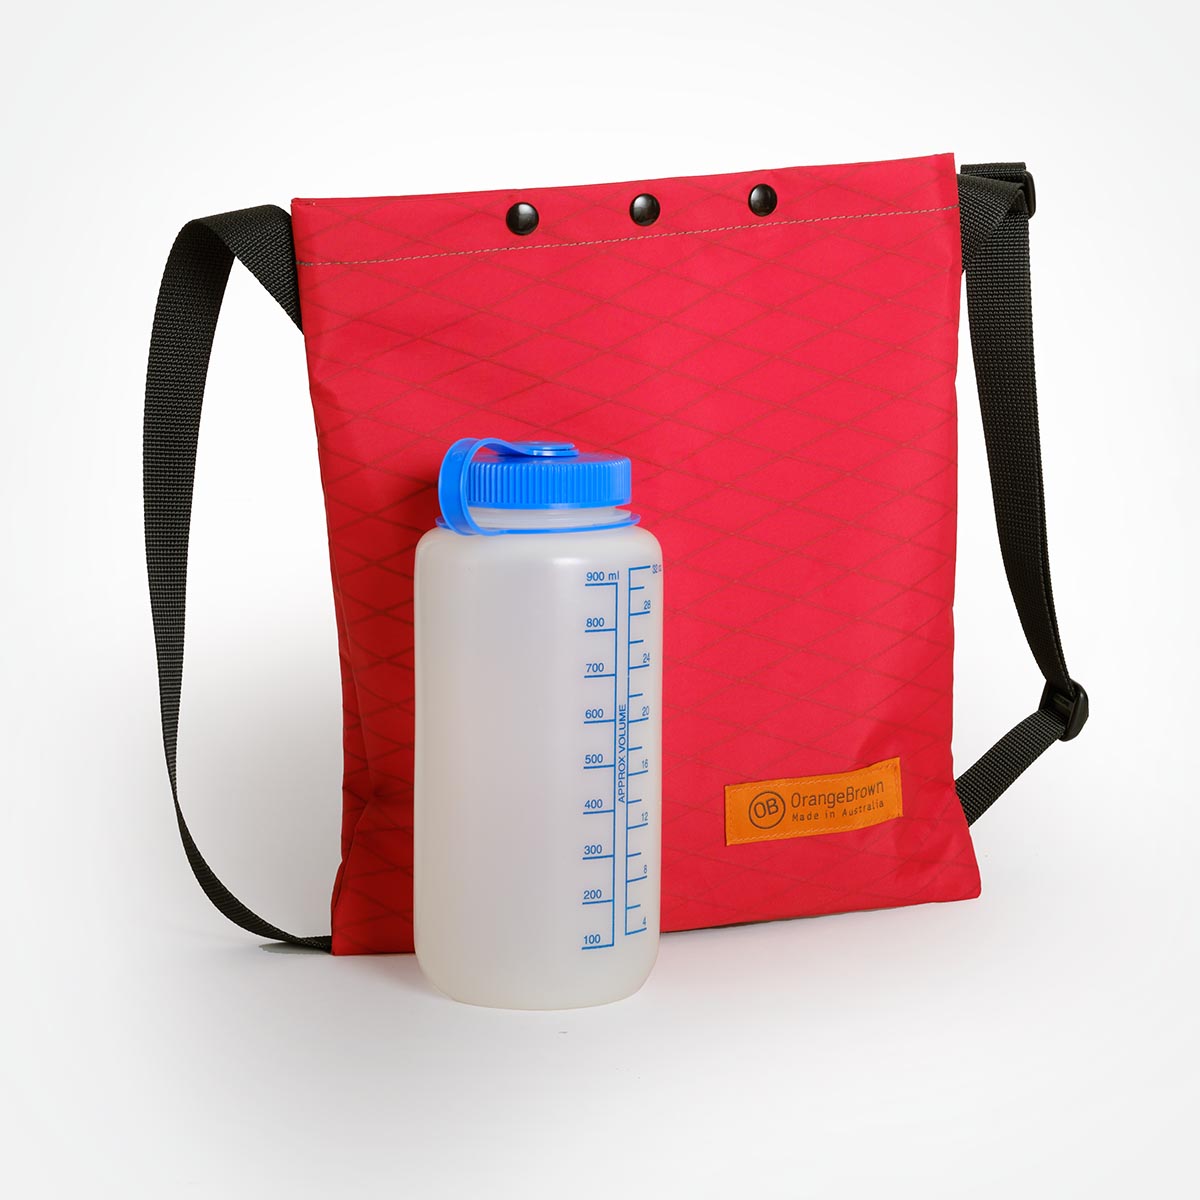 A red sling bag made by OrangeBrown in Australia from X-Pac VX21 fabric with  a Nalgene 1L bottle in size comparison.